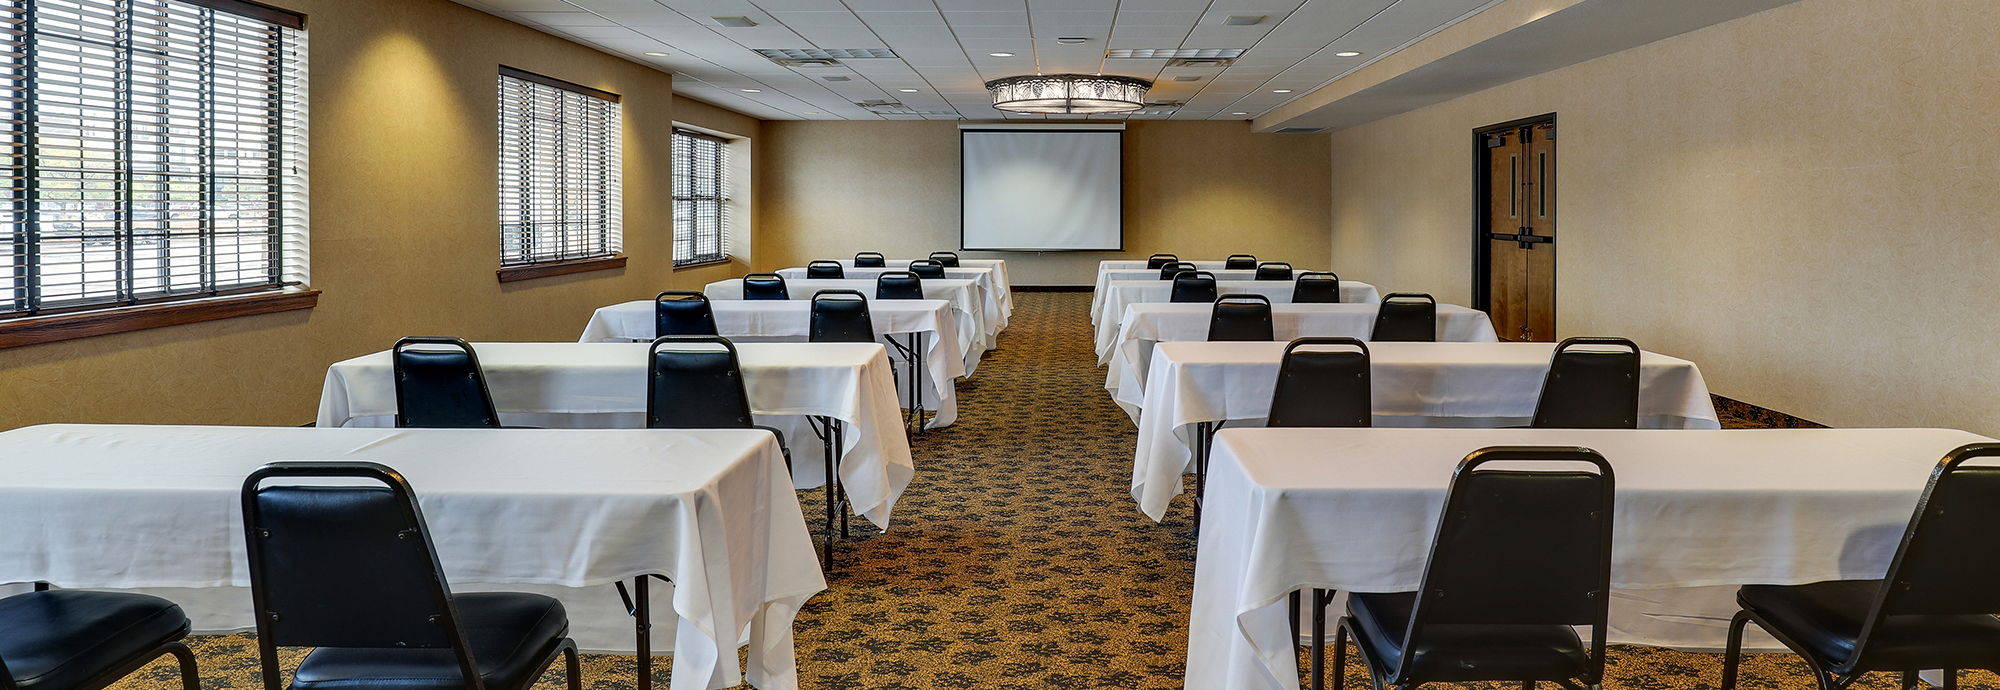 Reimagining Meetings: Innovative Approaches - Stoney Creek Hotels & Event Centers